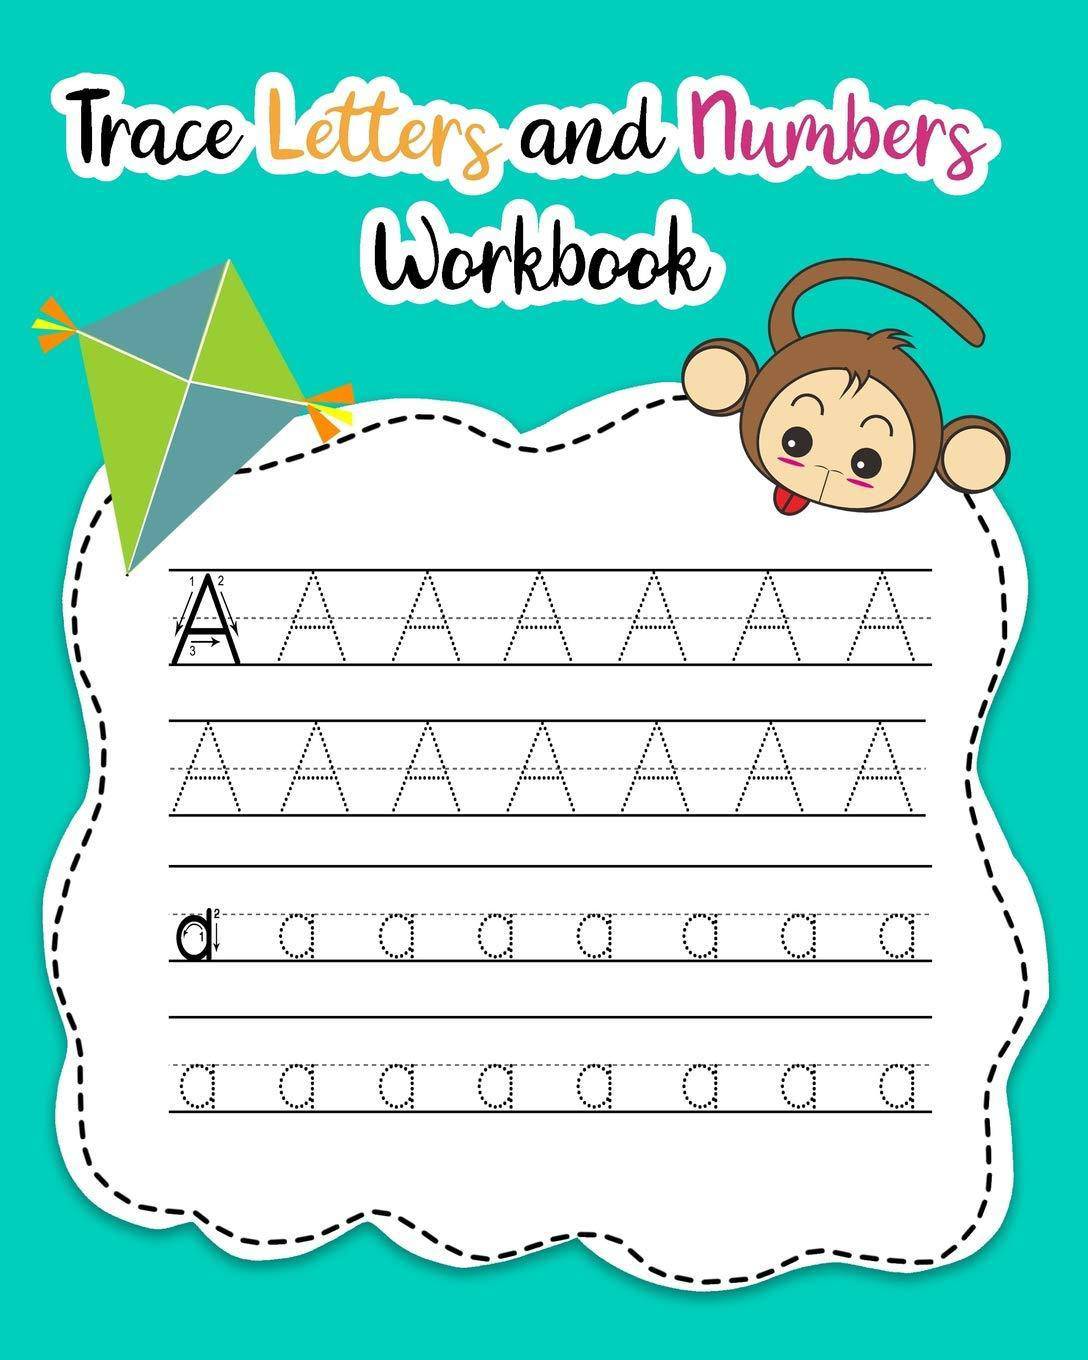 Trace Letters and Numbers Workbook - SureShot Books Publishing LLC